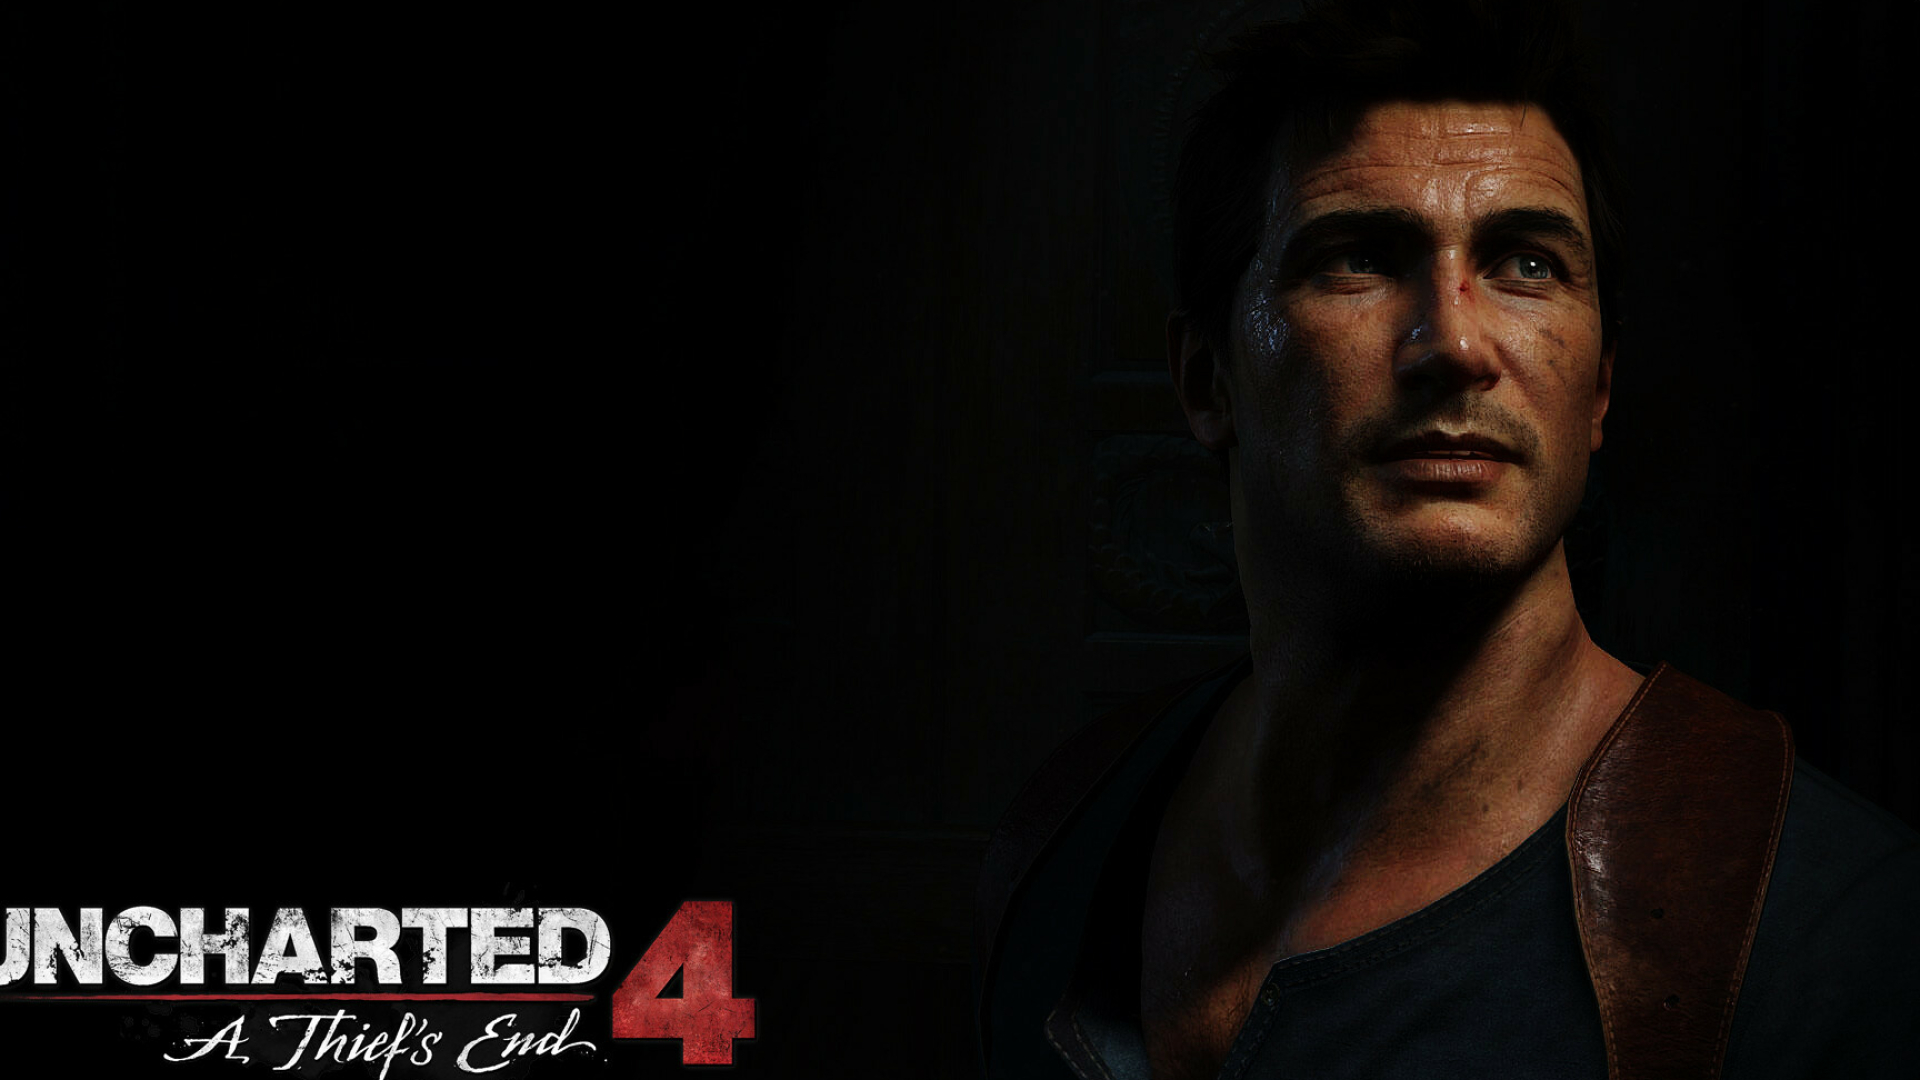 Uncharted: Nathan Drake has attracted mainly positive reviews, many focusing on his likable personality. 1920x1080 Full HD Wallpaper.